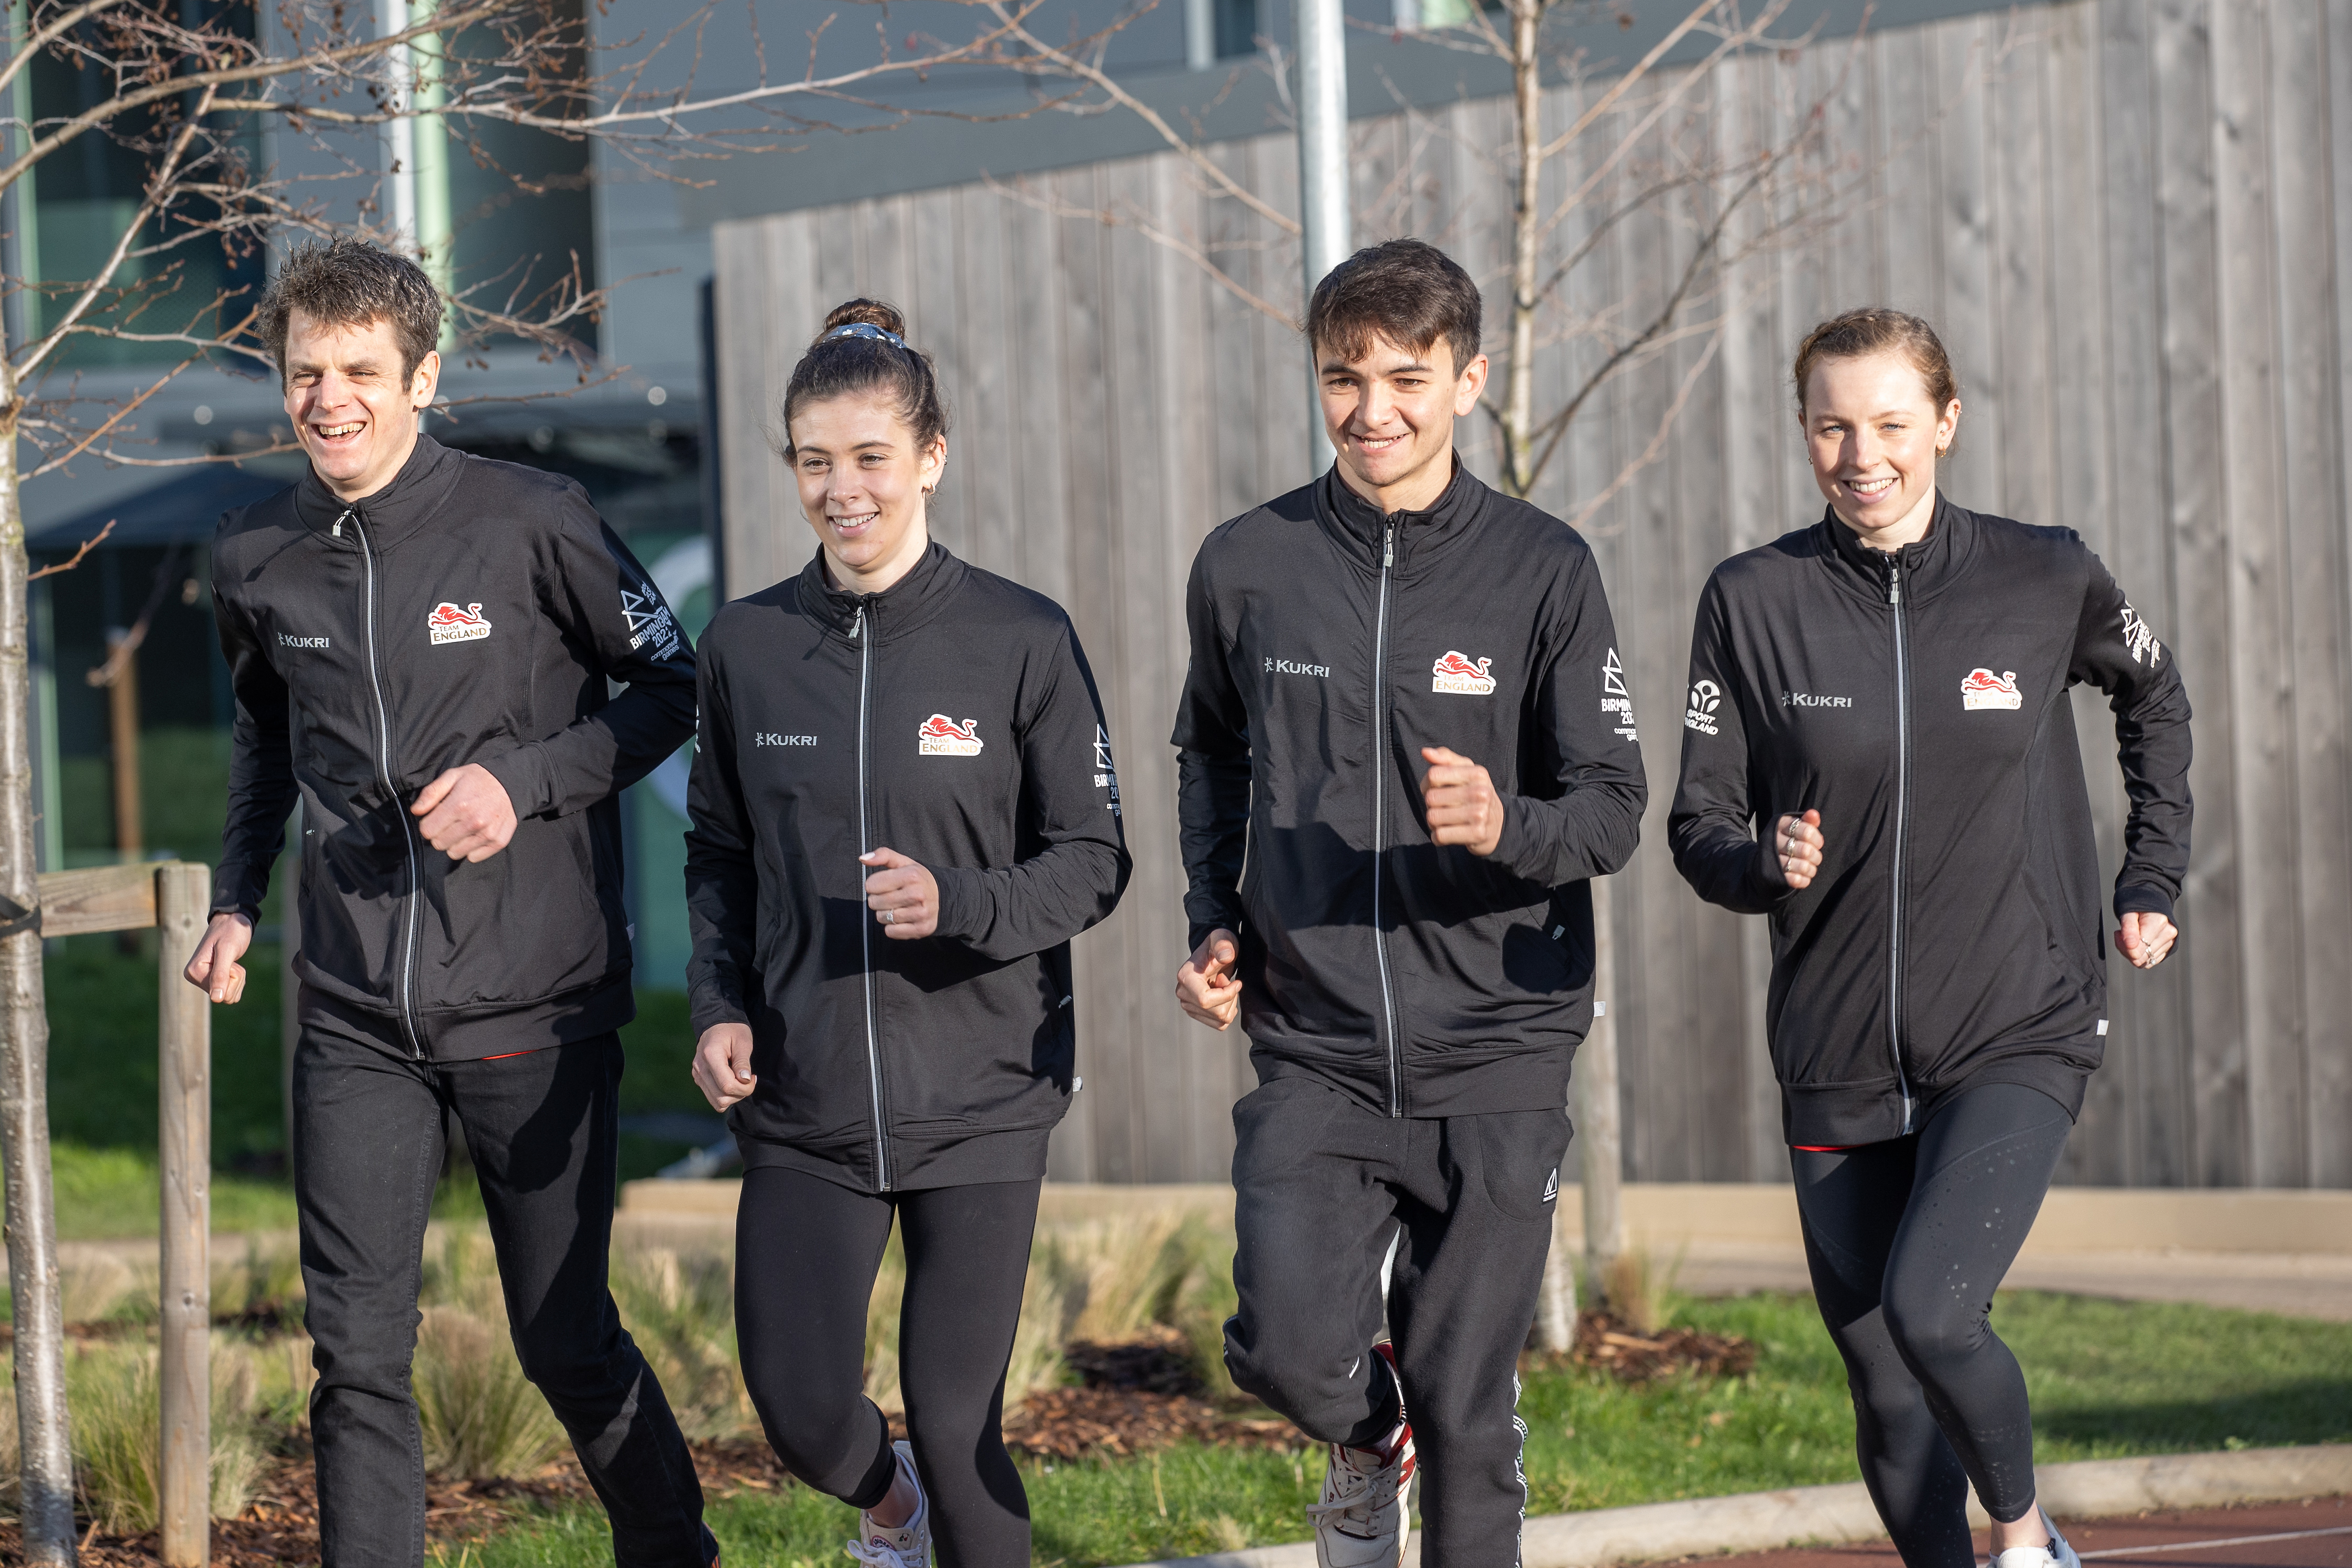 Jonny Brownlee, Sophie Coldwell, Alex Yee & Georgia Taylor-Brown are the first athletes selected for Team England at Birmingham 2022